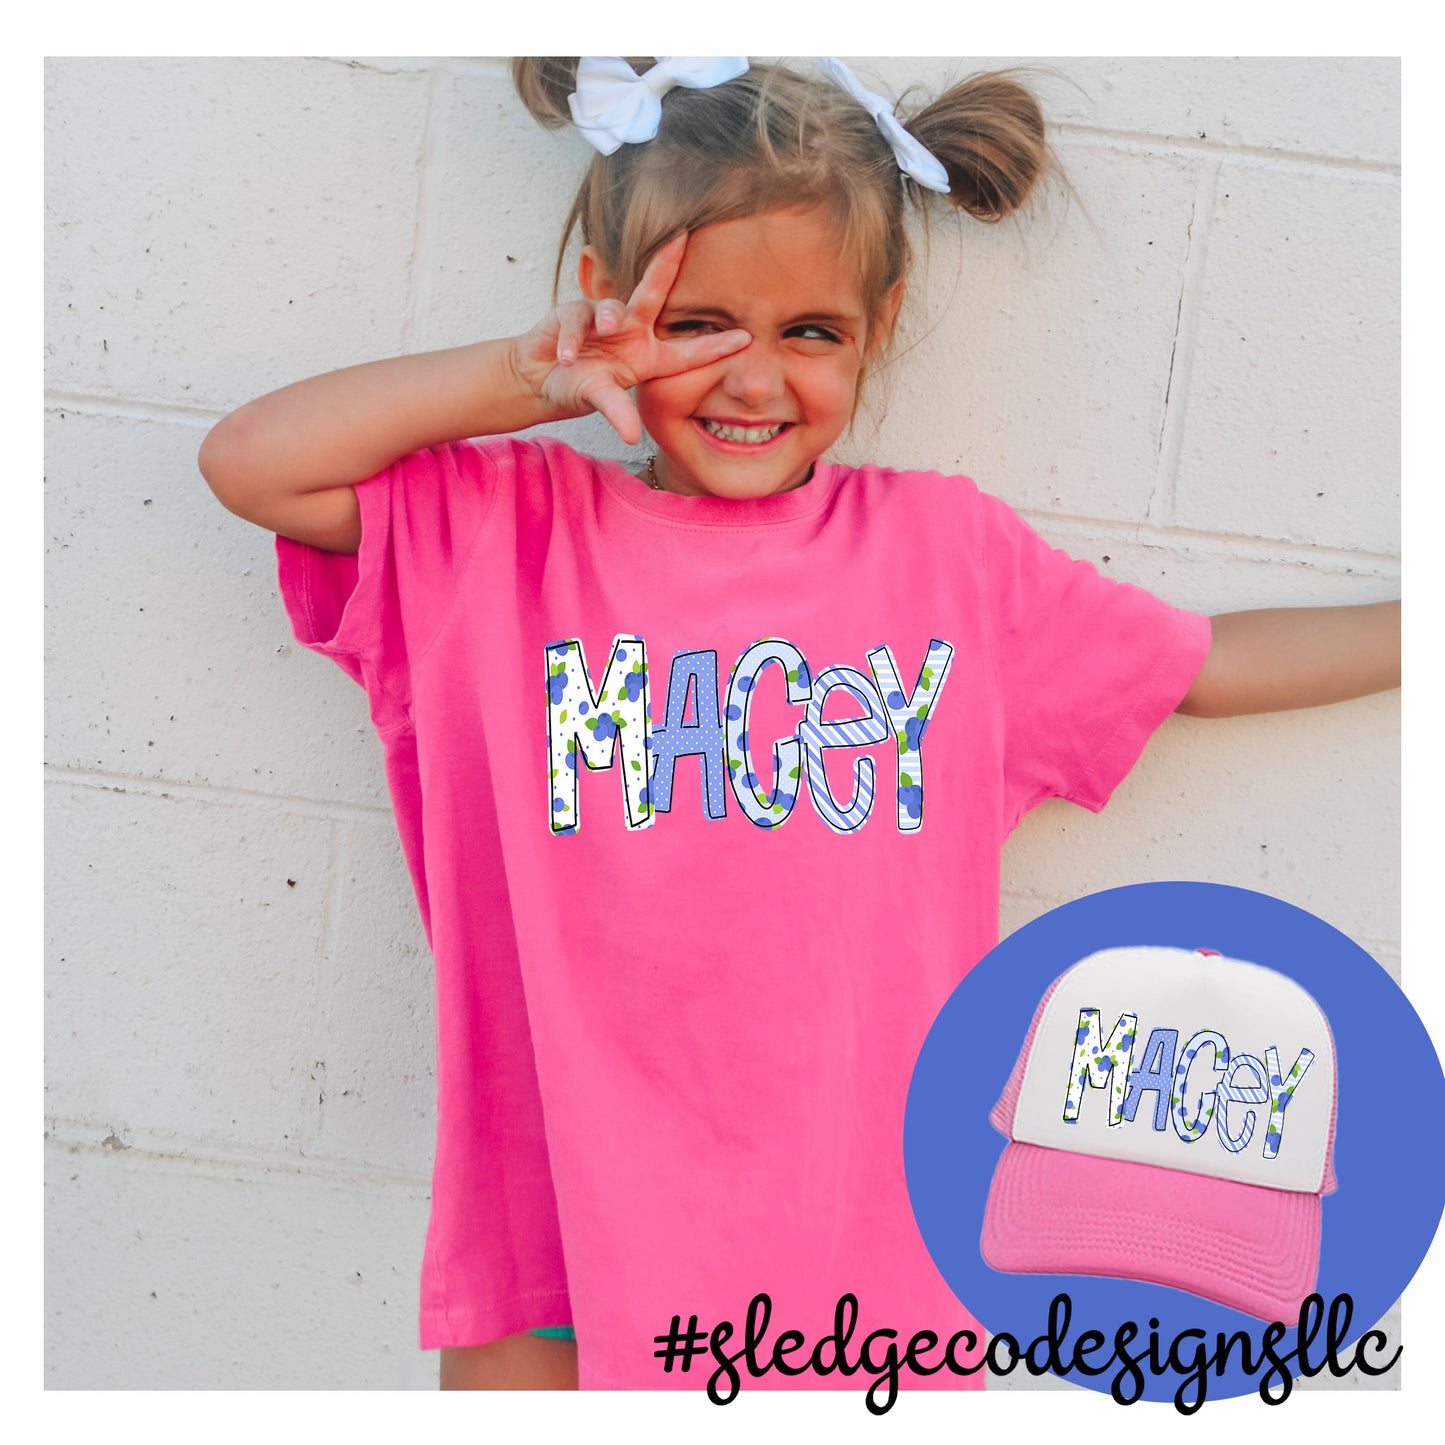 "BLUE BERRIES" Personalized Hand Drawn - Name Shirts for MOM, MINI, GRANDMAW, OR ALL THE GIRLS! | PERFECT FOR TEAMS || CUSTOM TSHIRT